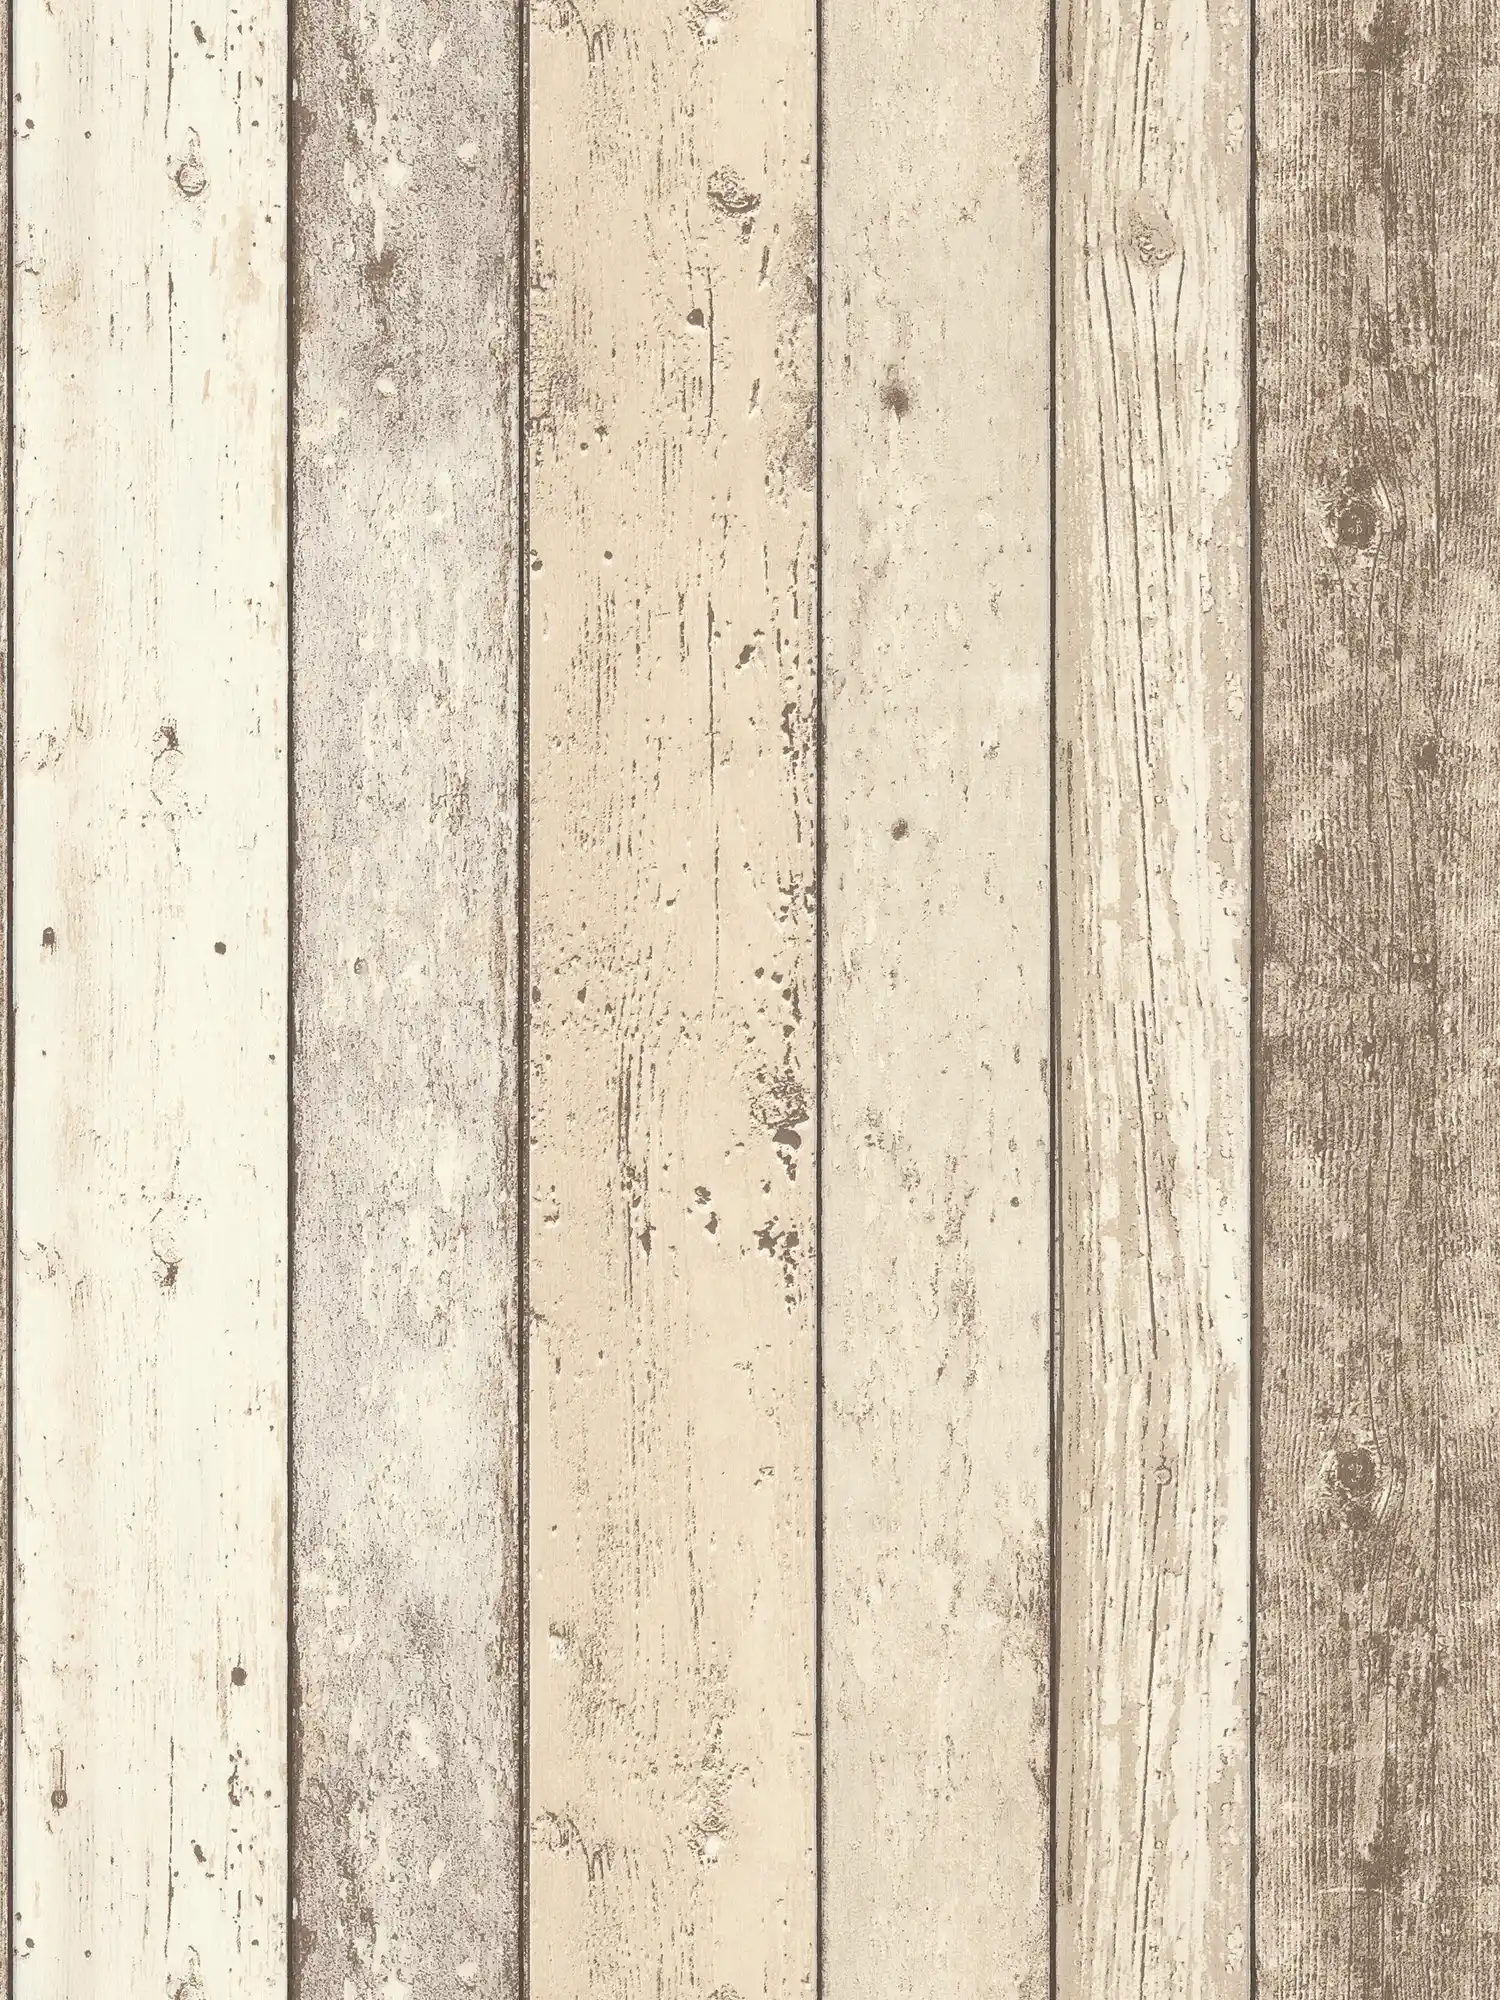 Rustic boards wallpaper with wooden boards in used look - beige, brown, white
